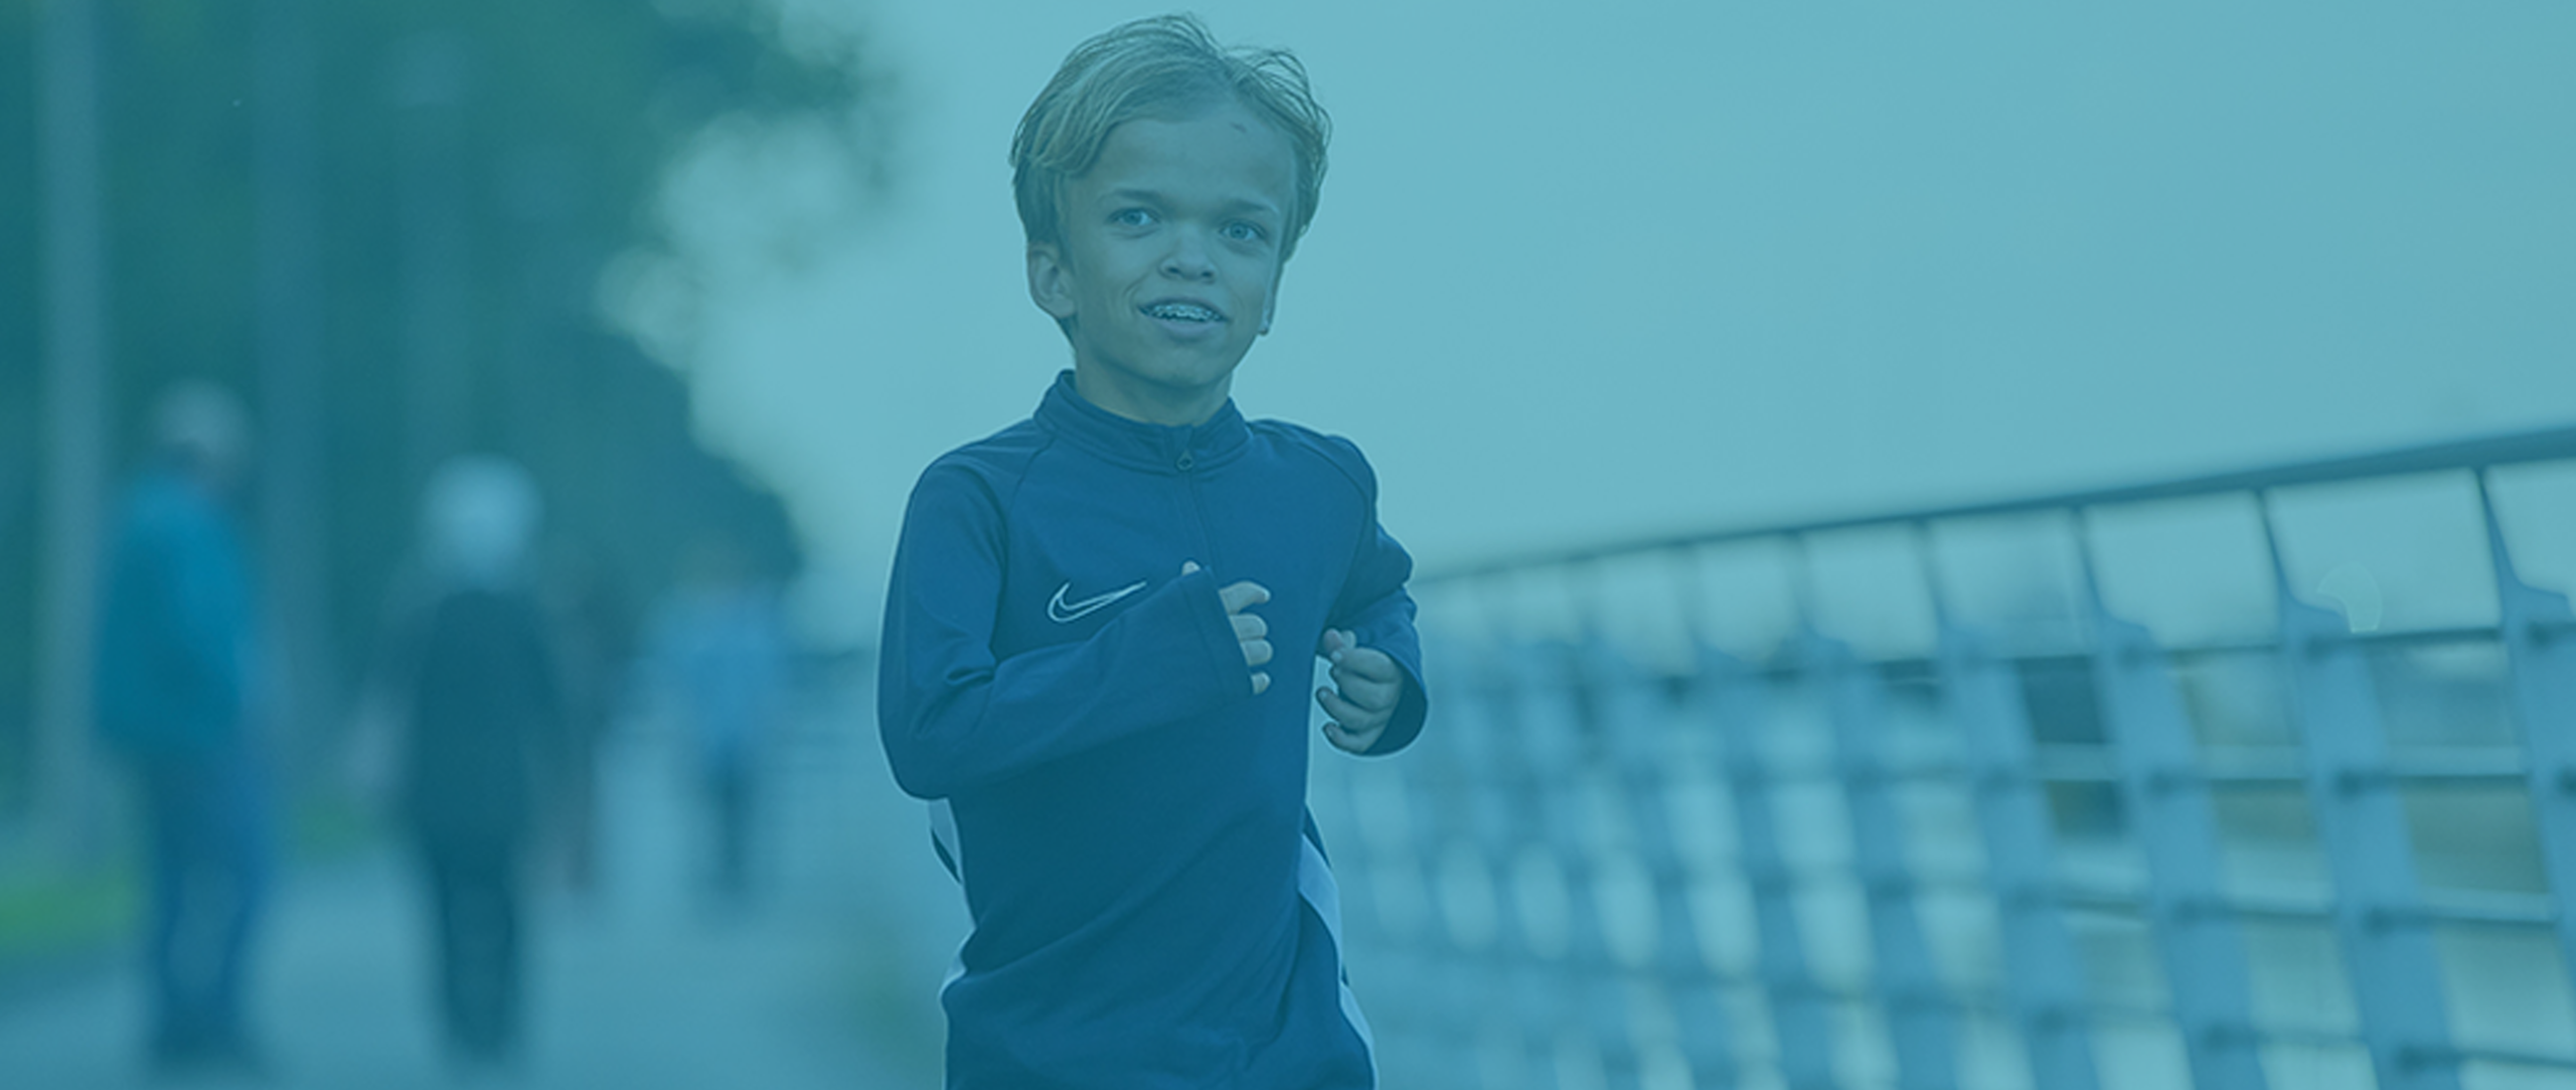 a boy with Achondroplasia wearing braces and running clothes